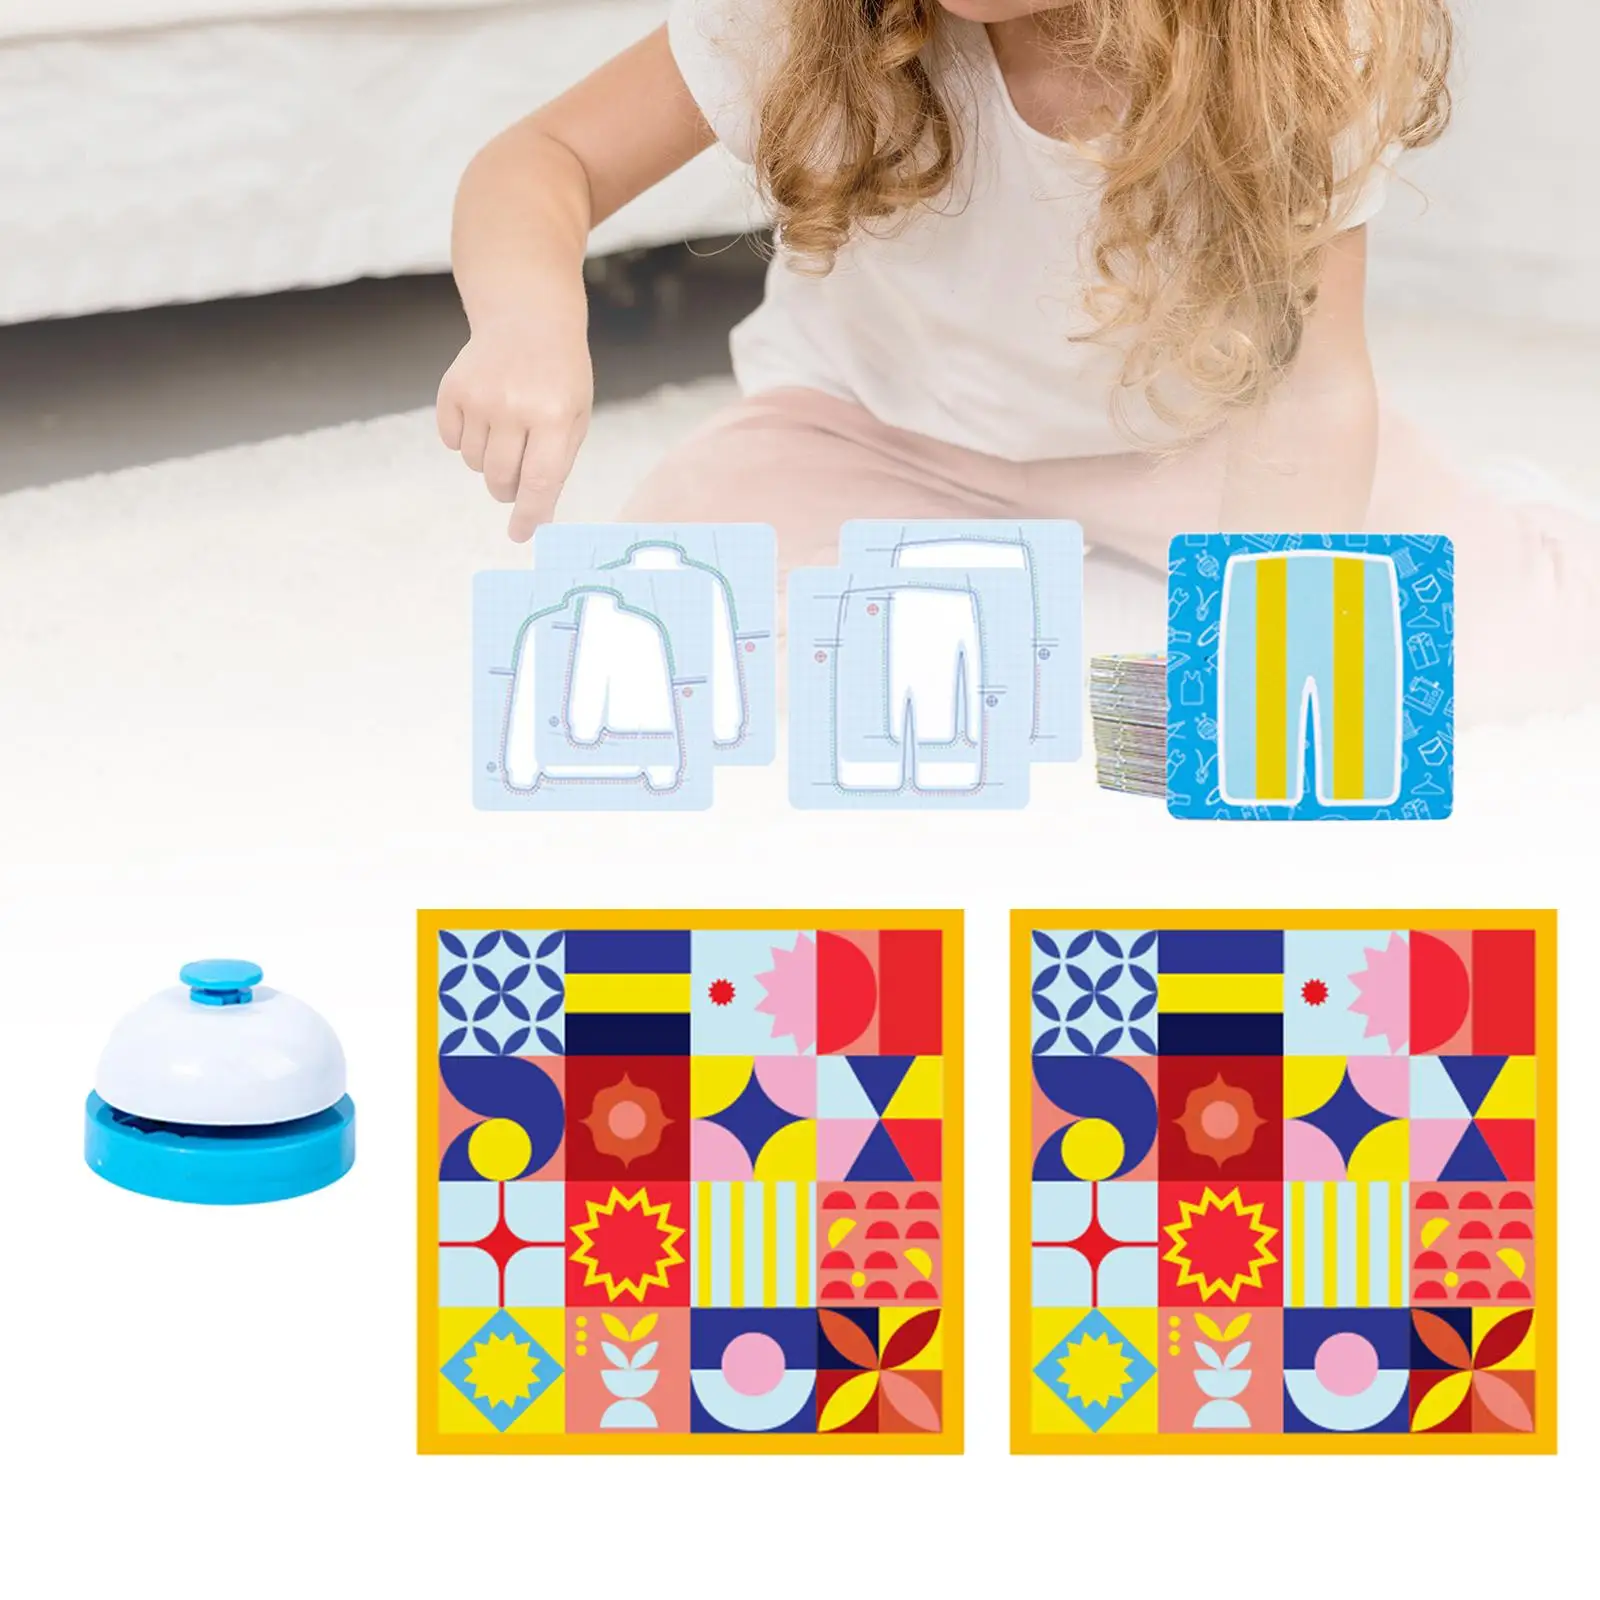 Shape Matching Puzzle Development Toy Fine Motor Skill Tailor for Stocking Stuffers Ages 3 4 5 Years Old Holiday Gift